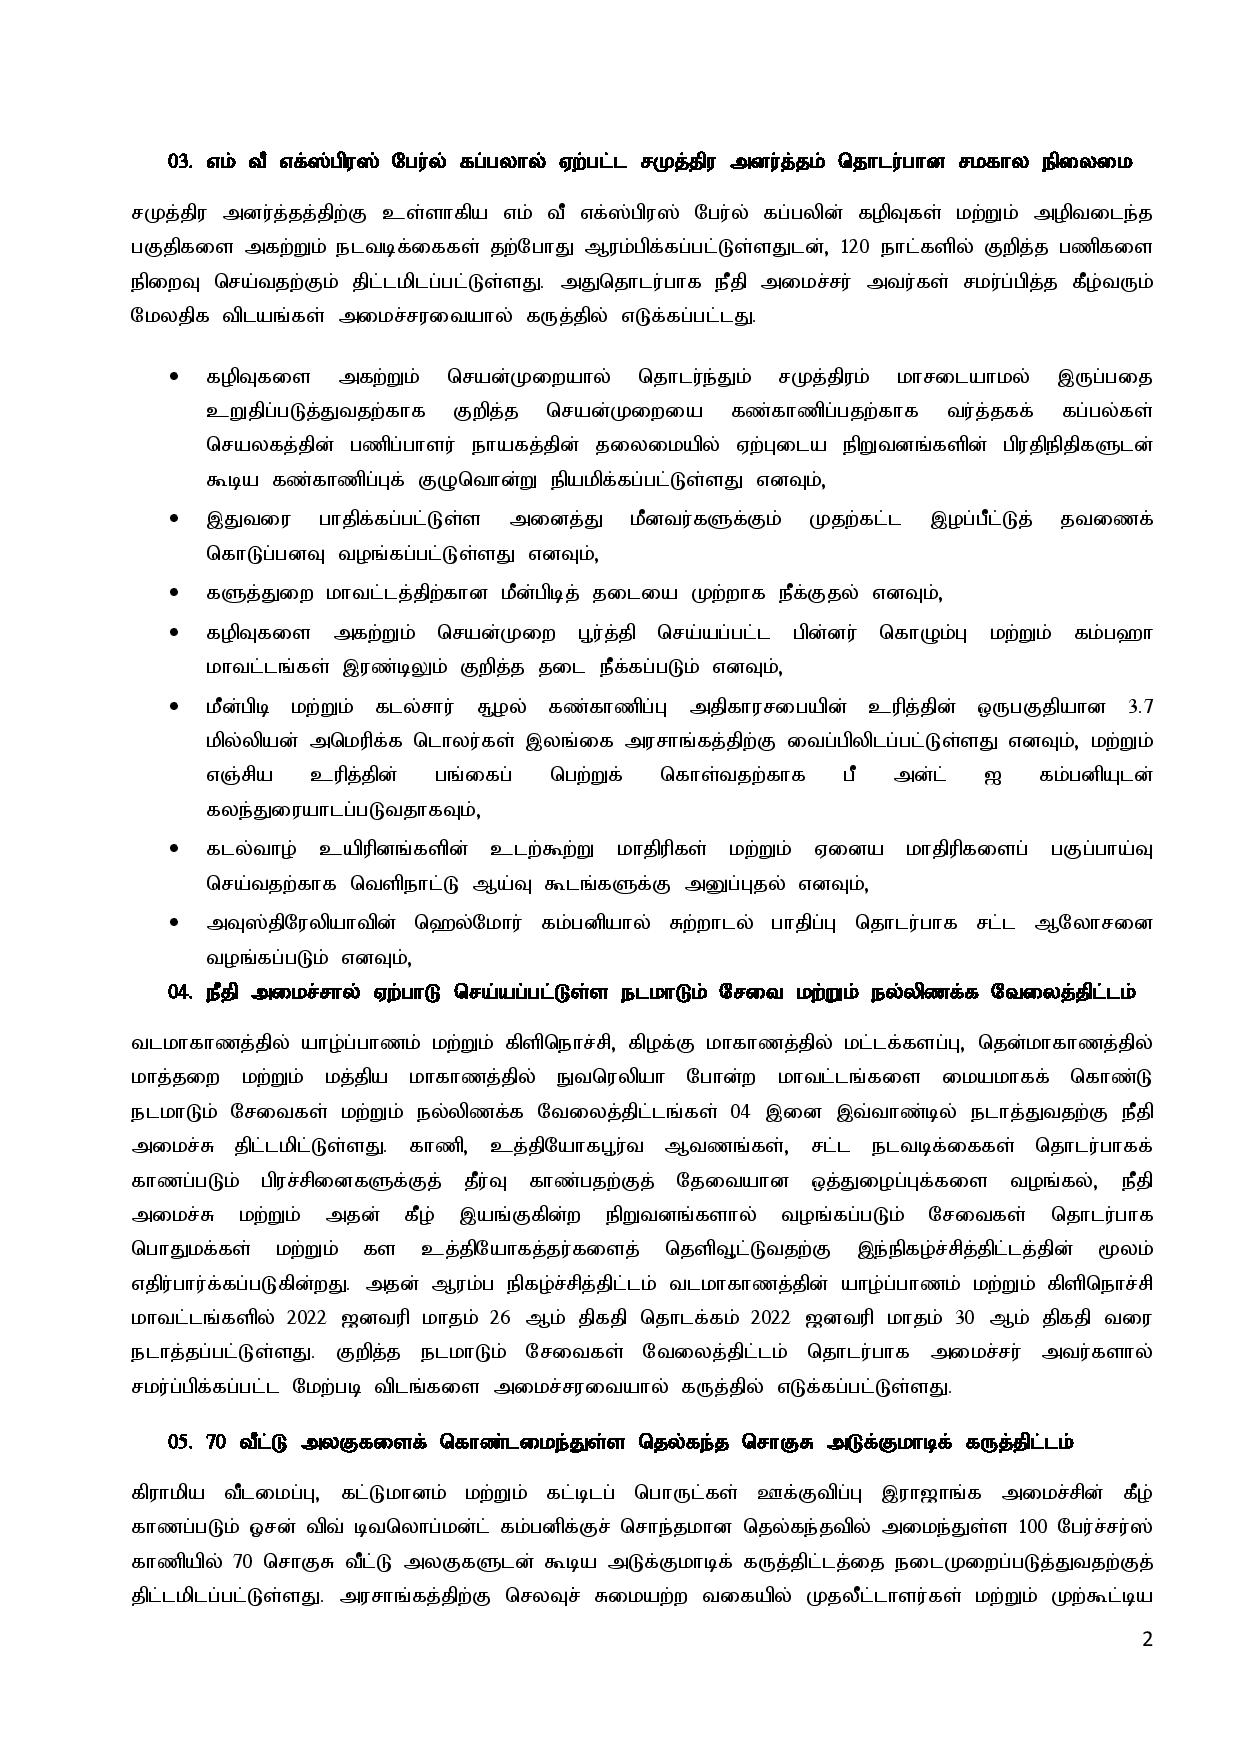 Cabinet Decisions on 31.01.2022 Tamil page 002